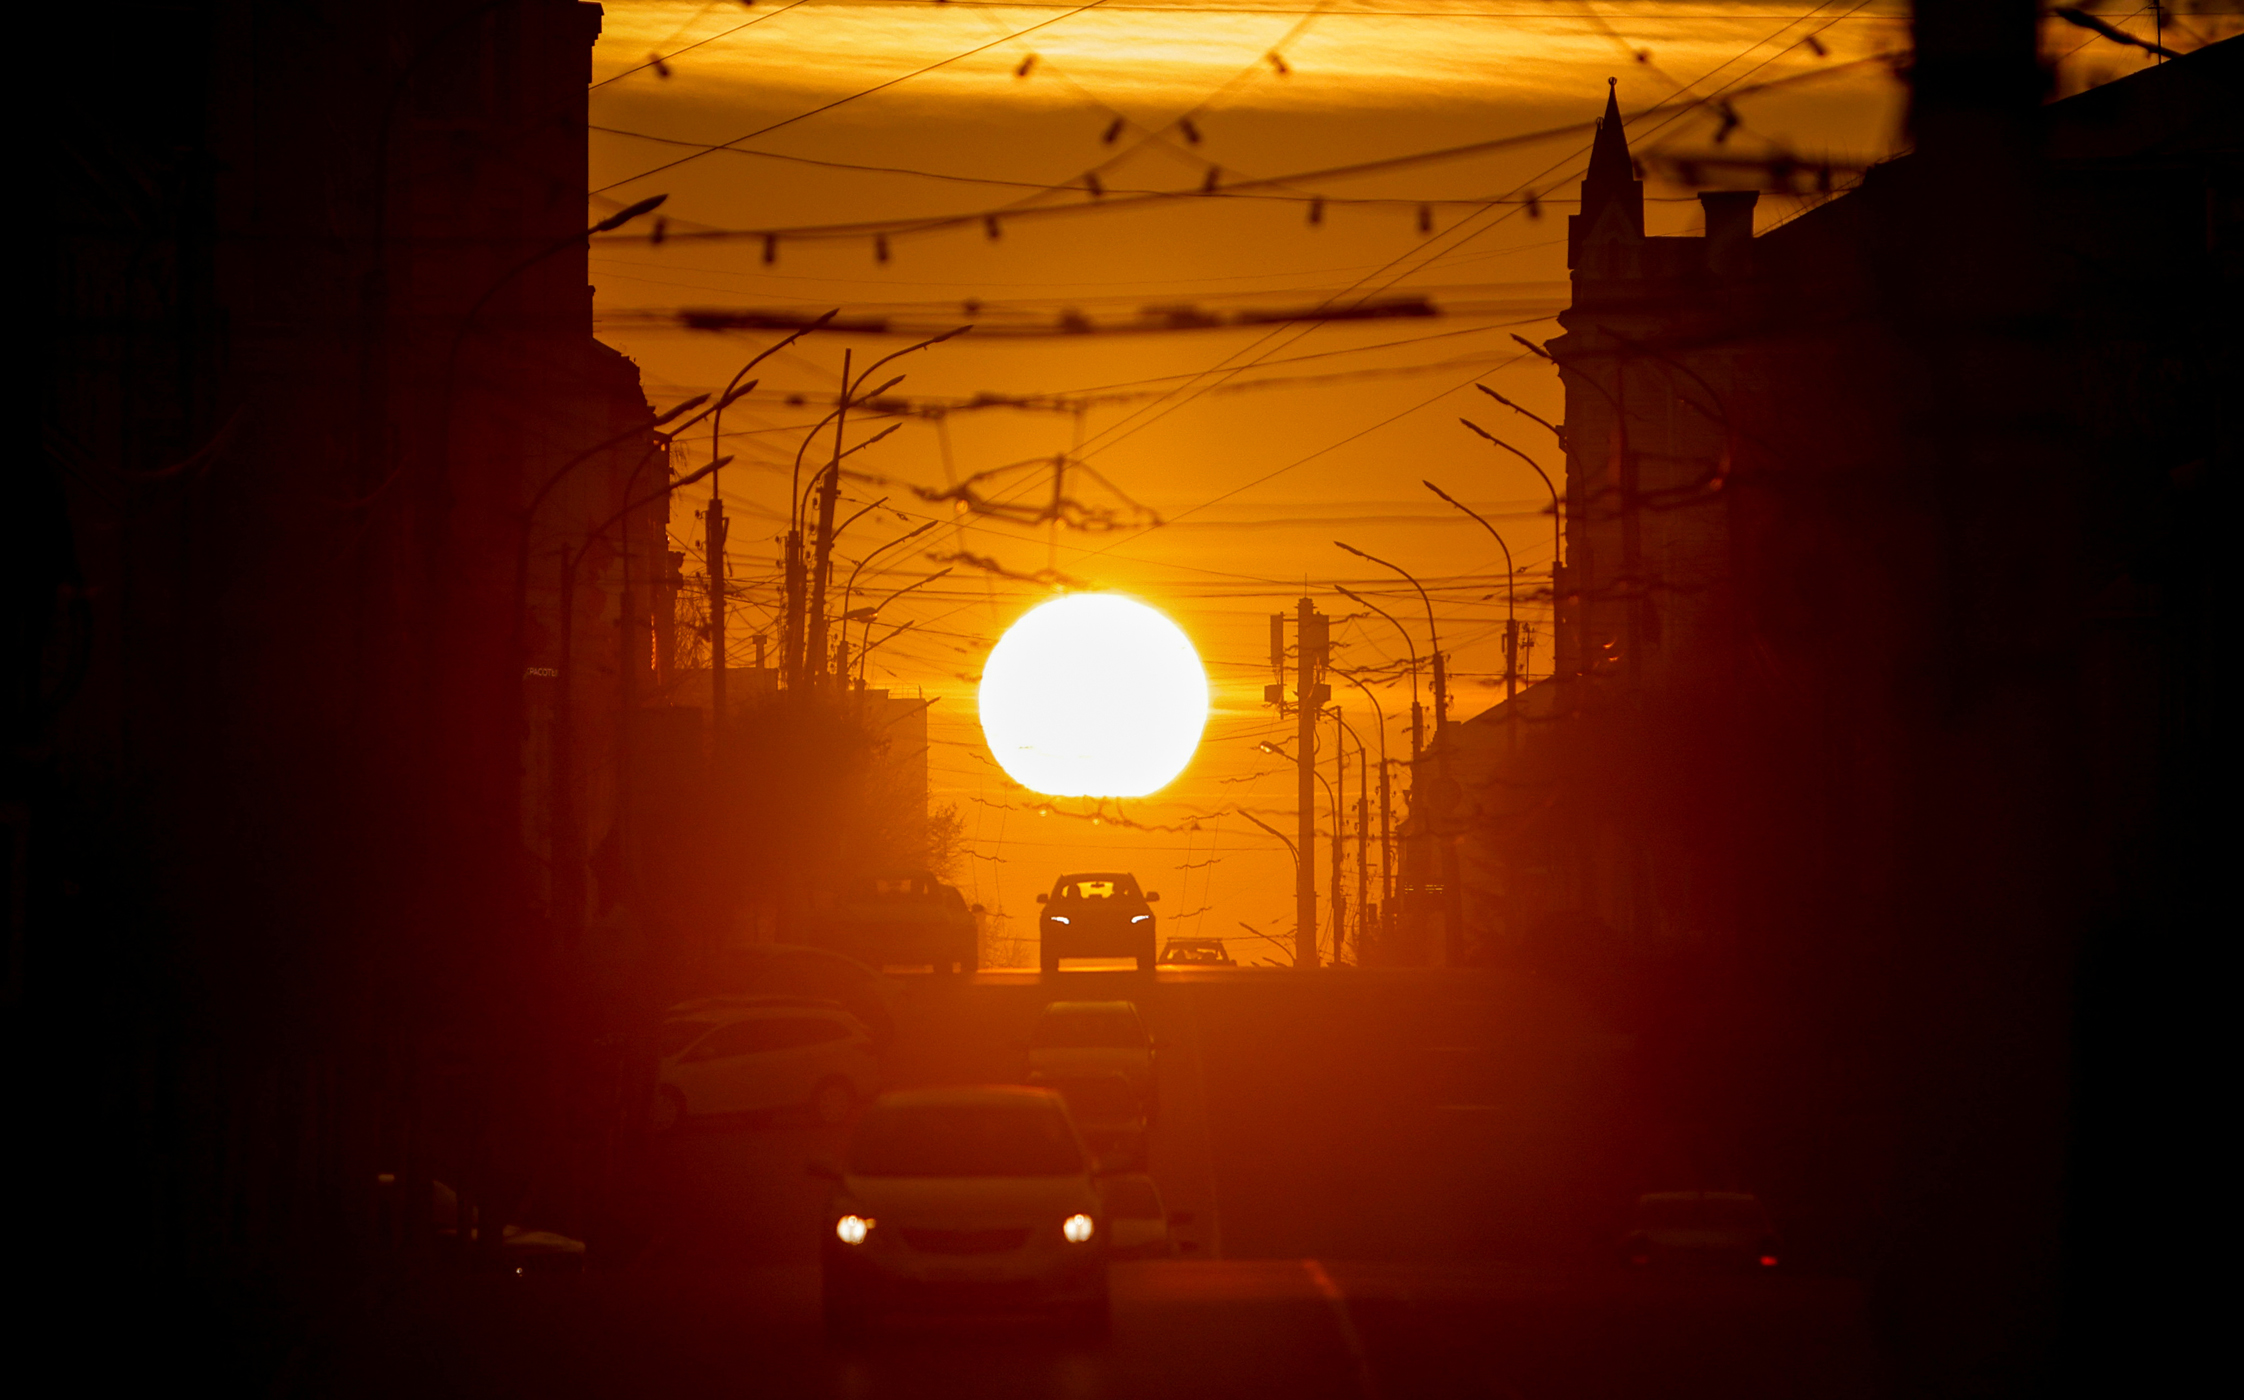 Cars drive along the street as the sun sets in Ryazan, Russia December 12, 2020. REUTERS/Maxim Shemetov